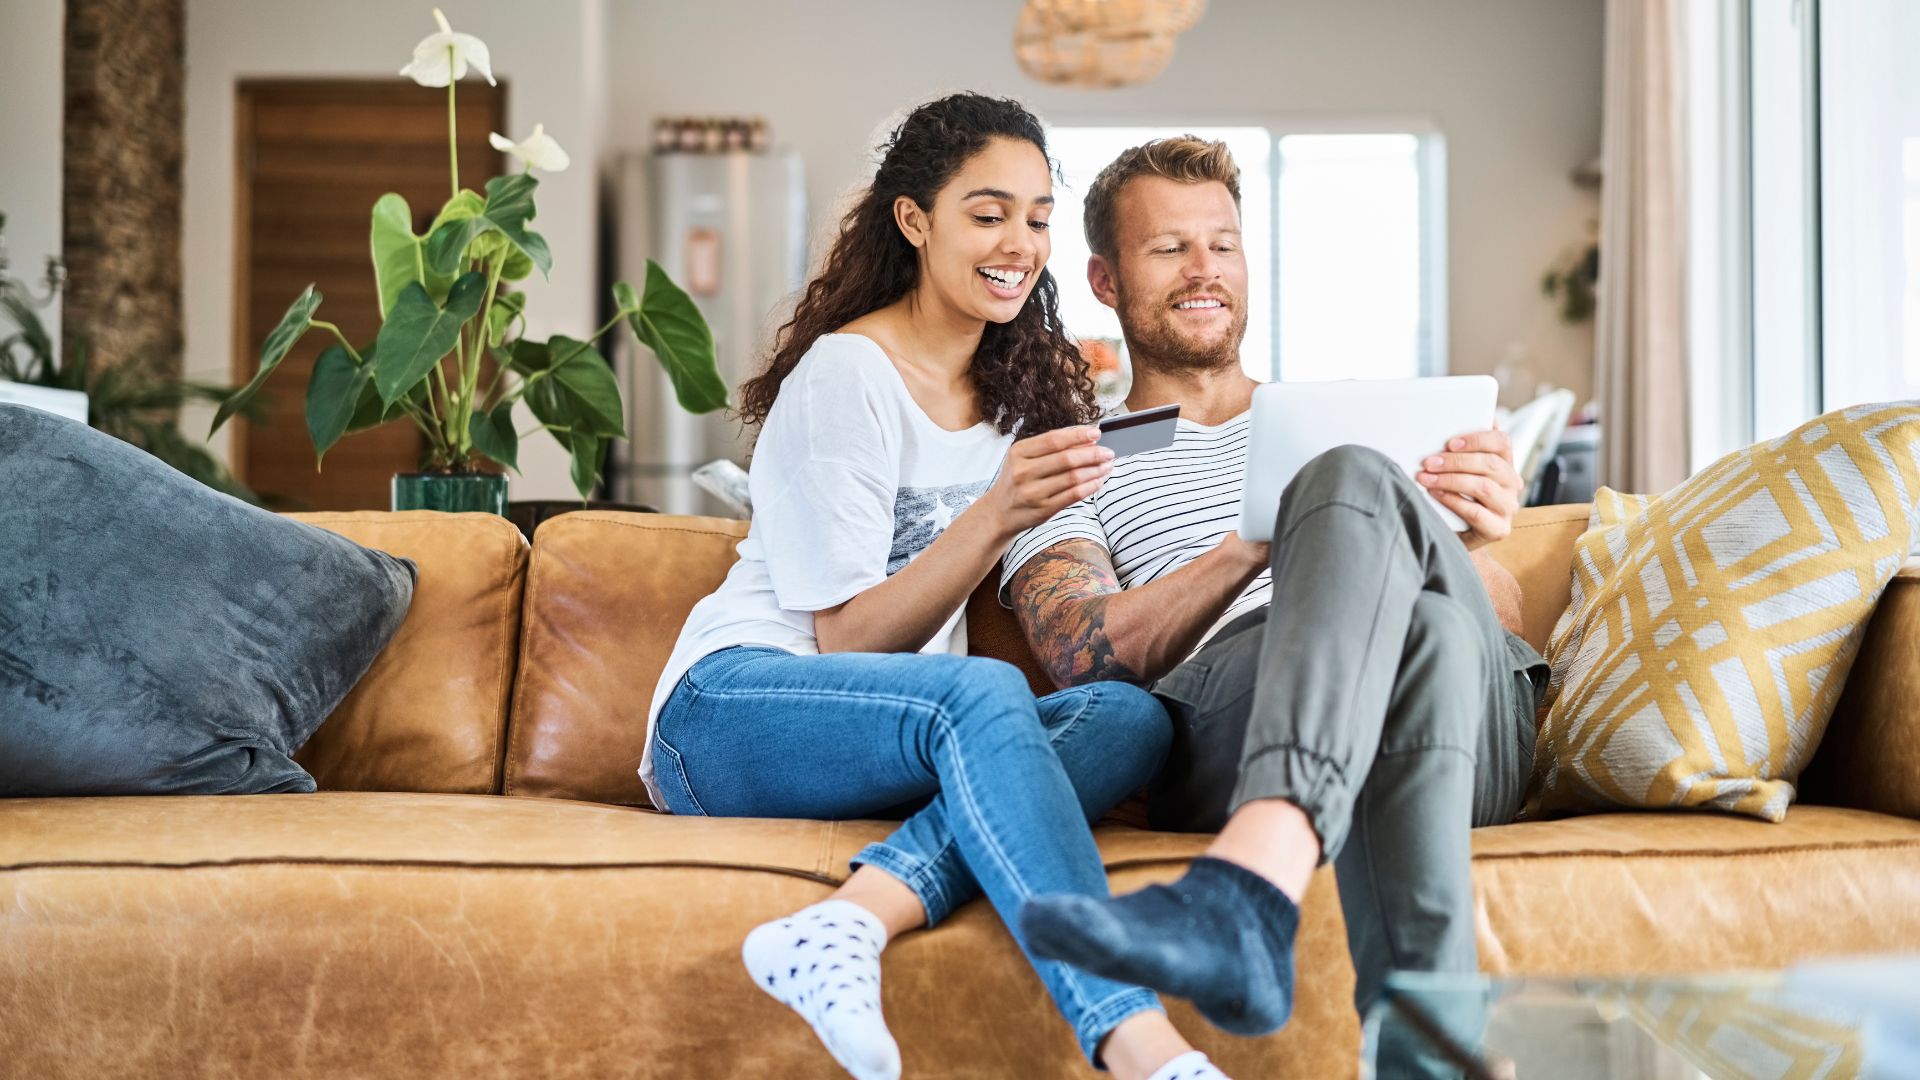 A woman wearing a white T-shirt and skinny jeans with curly hair is sitting on a brown leather sofa with aesthetic design pillows with a man wearing a white T-shirt with black stripes and gray jogger pants is looking to make a transaction on the marketplace using a credit card in the living room